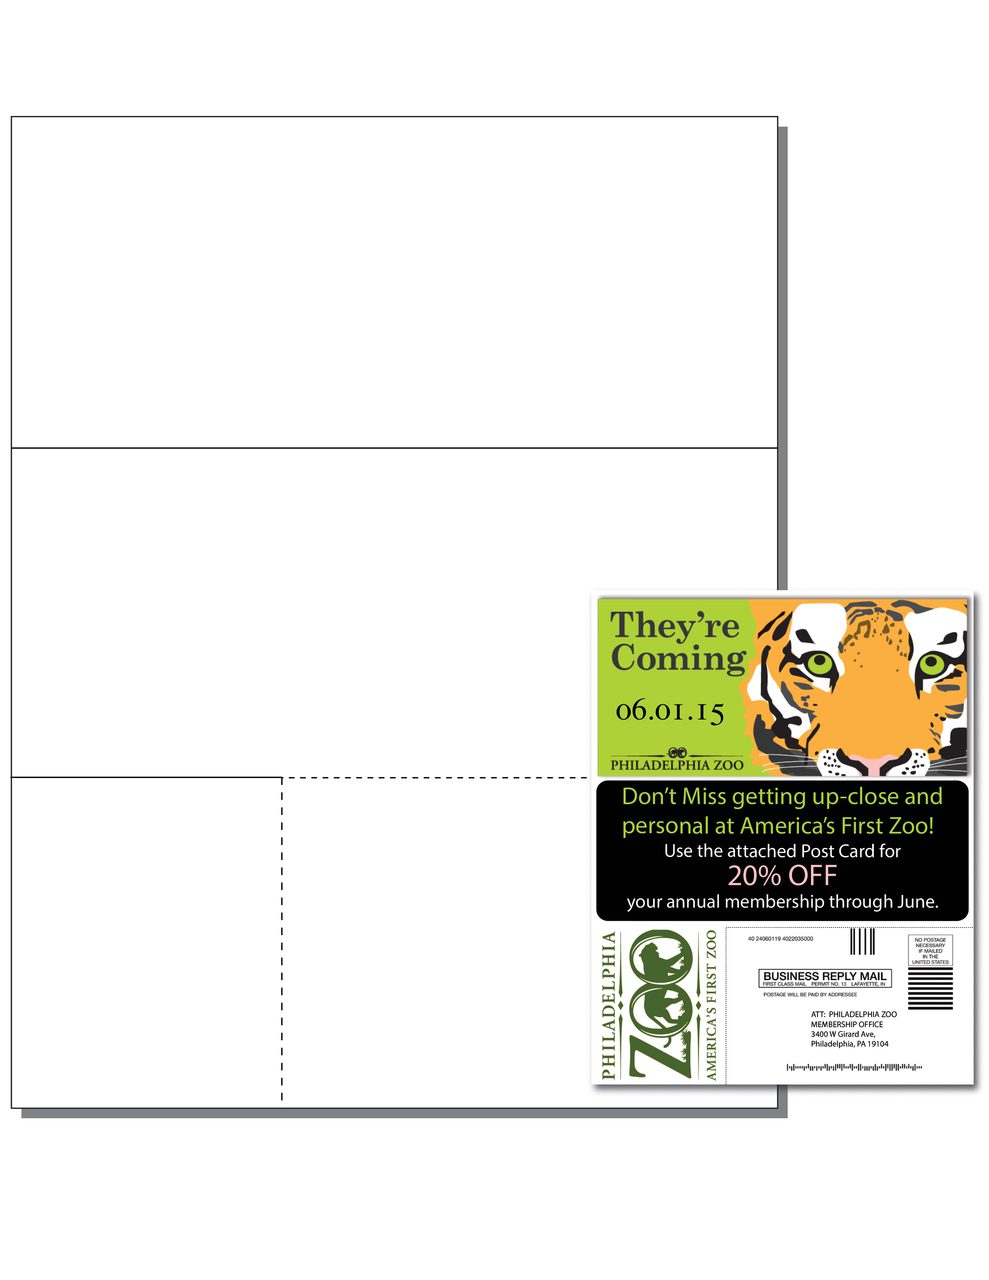 Item 104: 1-Up 3 3/4" x 8 1/2" Tri-Fold Mailer with Return Post Card 8 1/2" x 11" Sheet